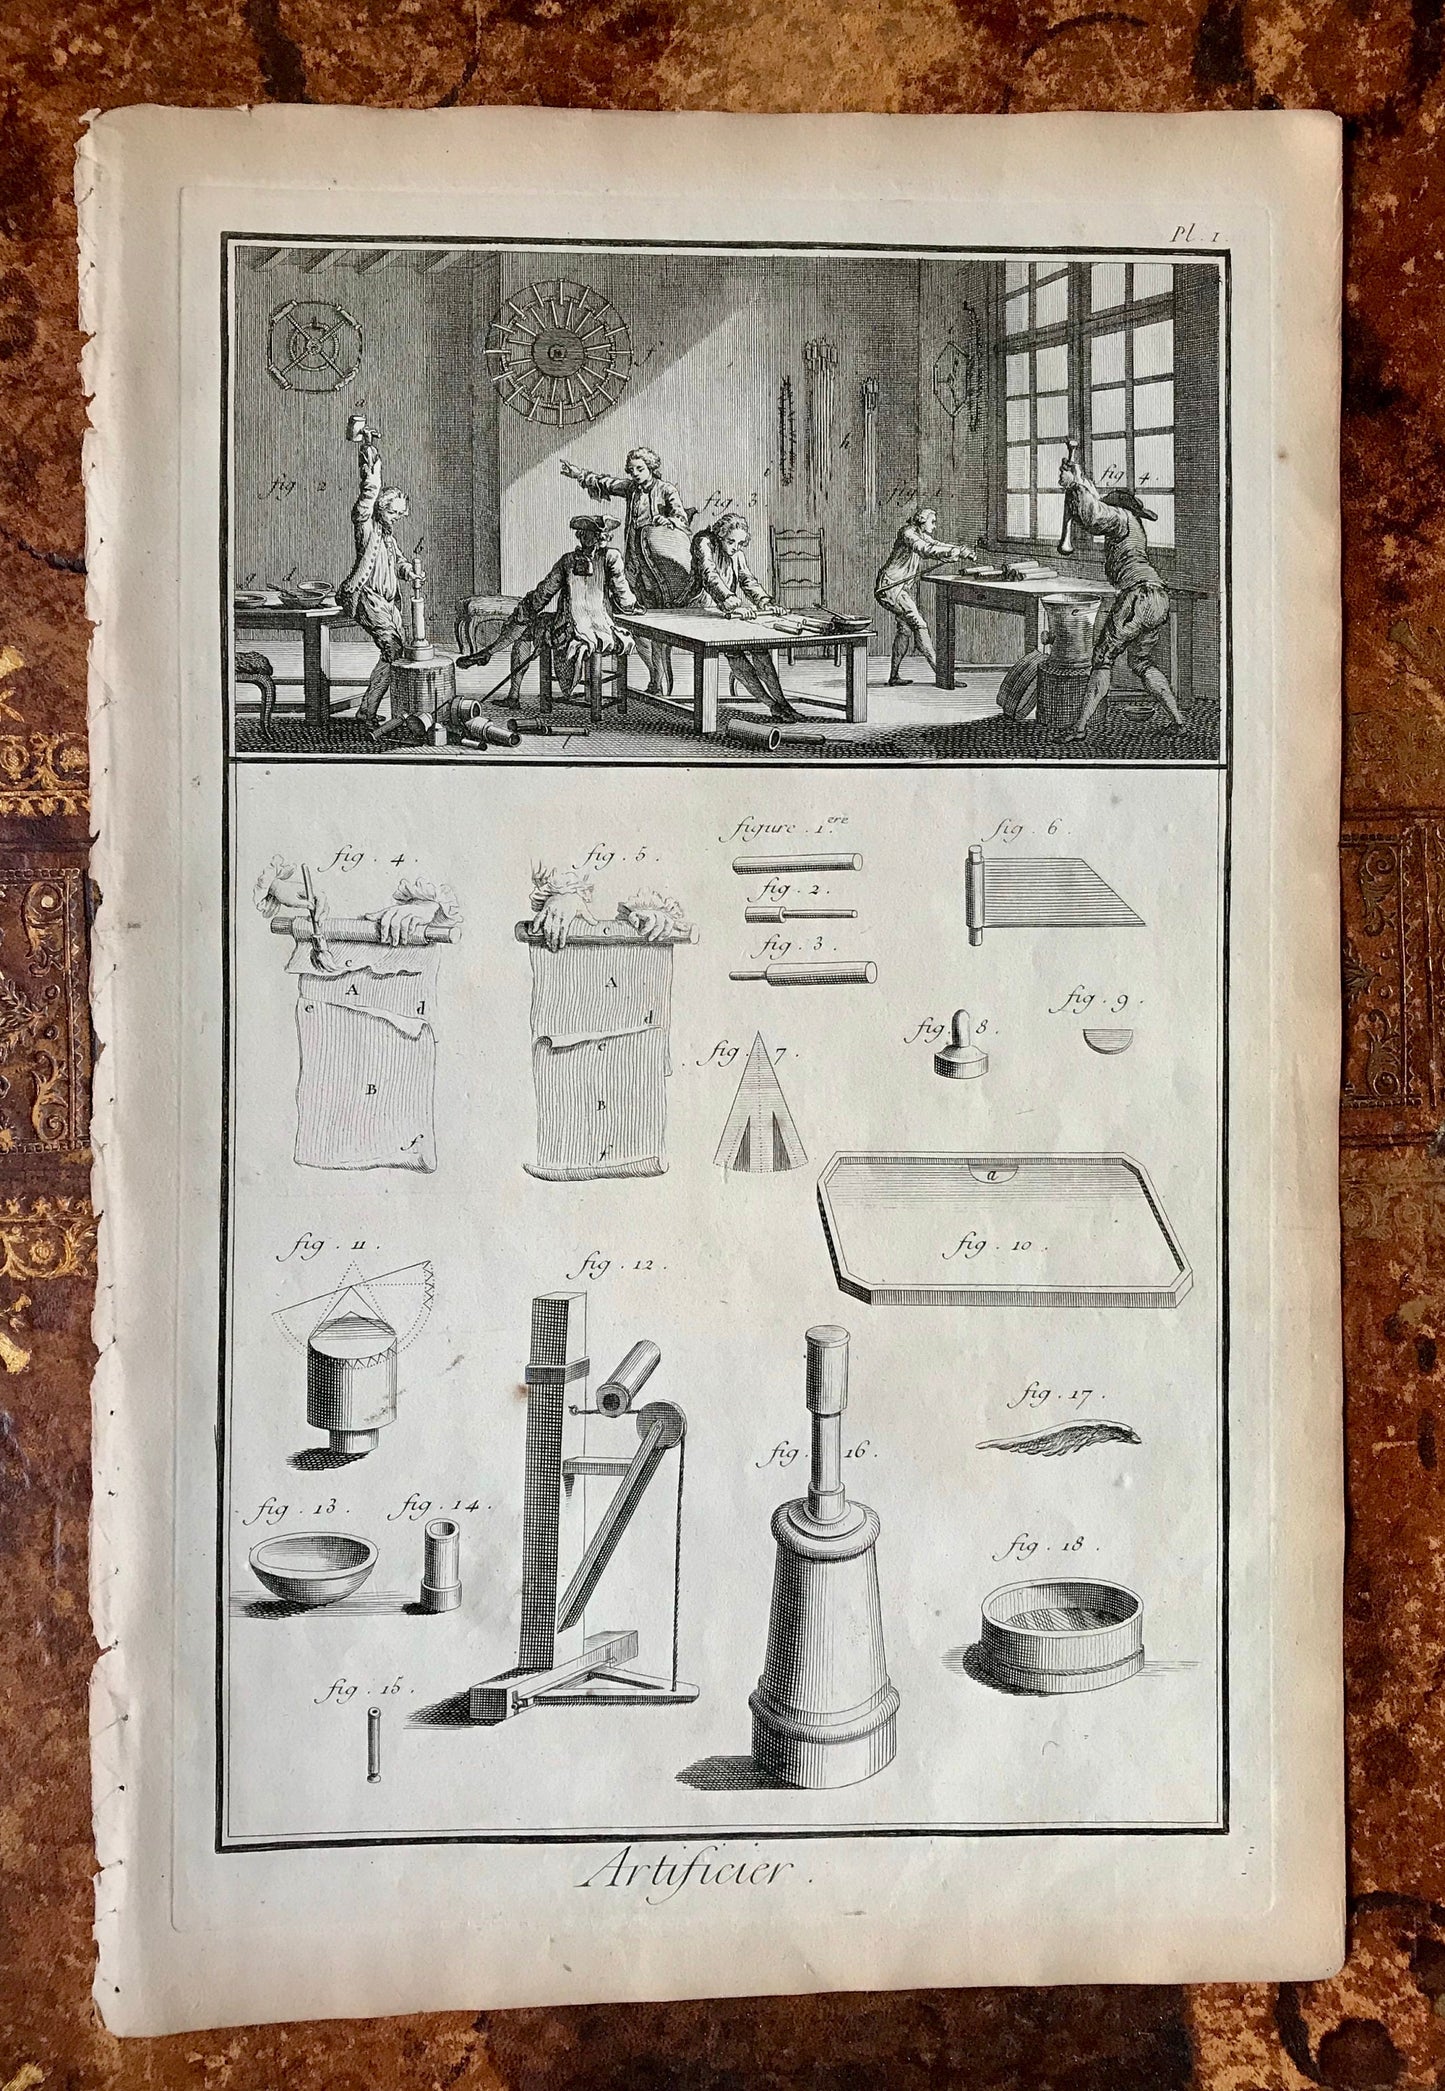 A Set of Seven Original Engraved Plates Illustrating the Manufacture of Fireworks - “Artificier”. Dated 1762. From the Recuil de Planche.